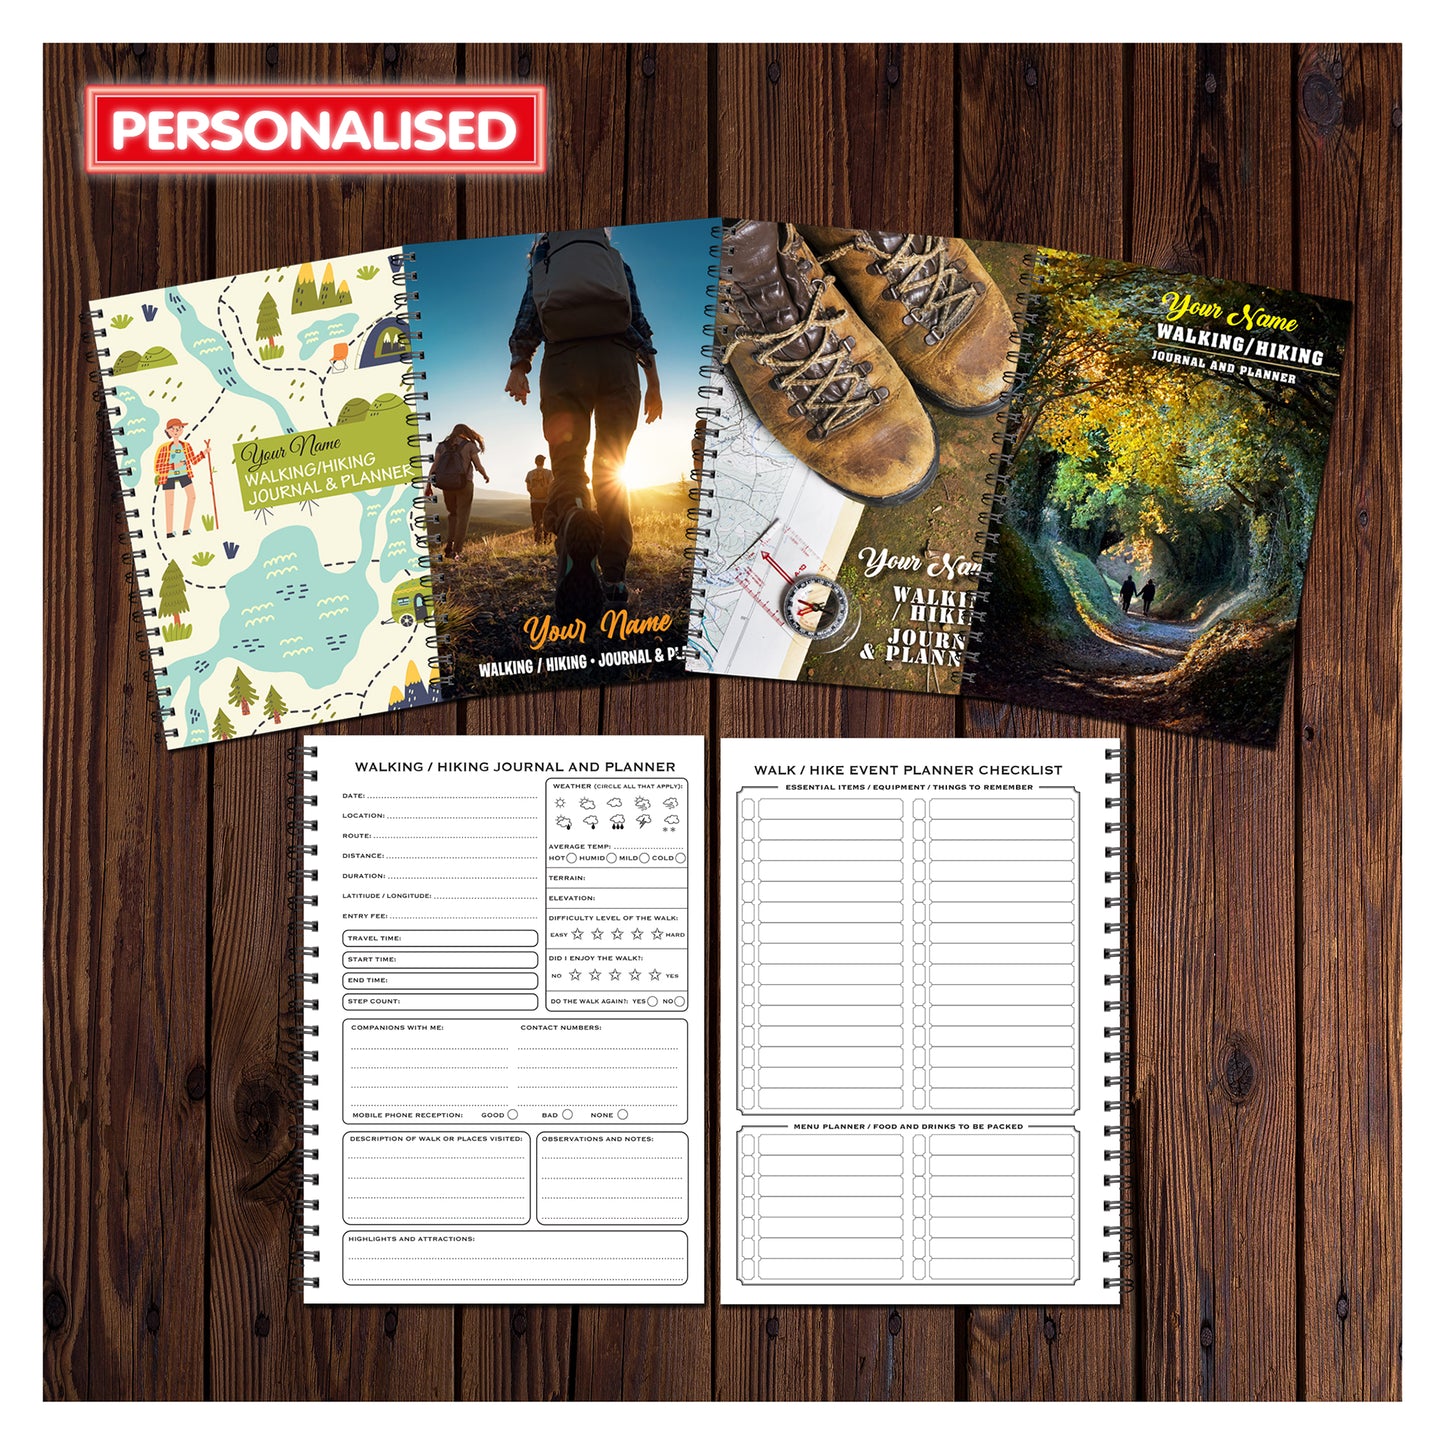 PERSONALISED Walking/Hiking Journal & Planner | A5 148mm x 210mm | 50 Double sided Pages | Printed on quality 120gsm